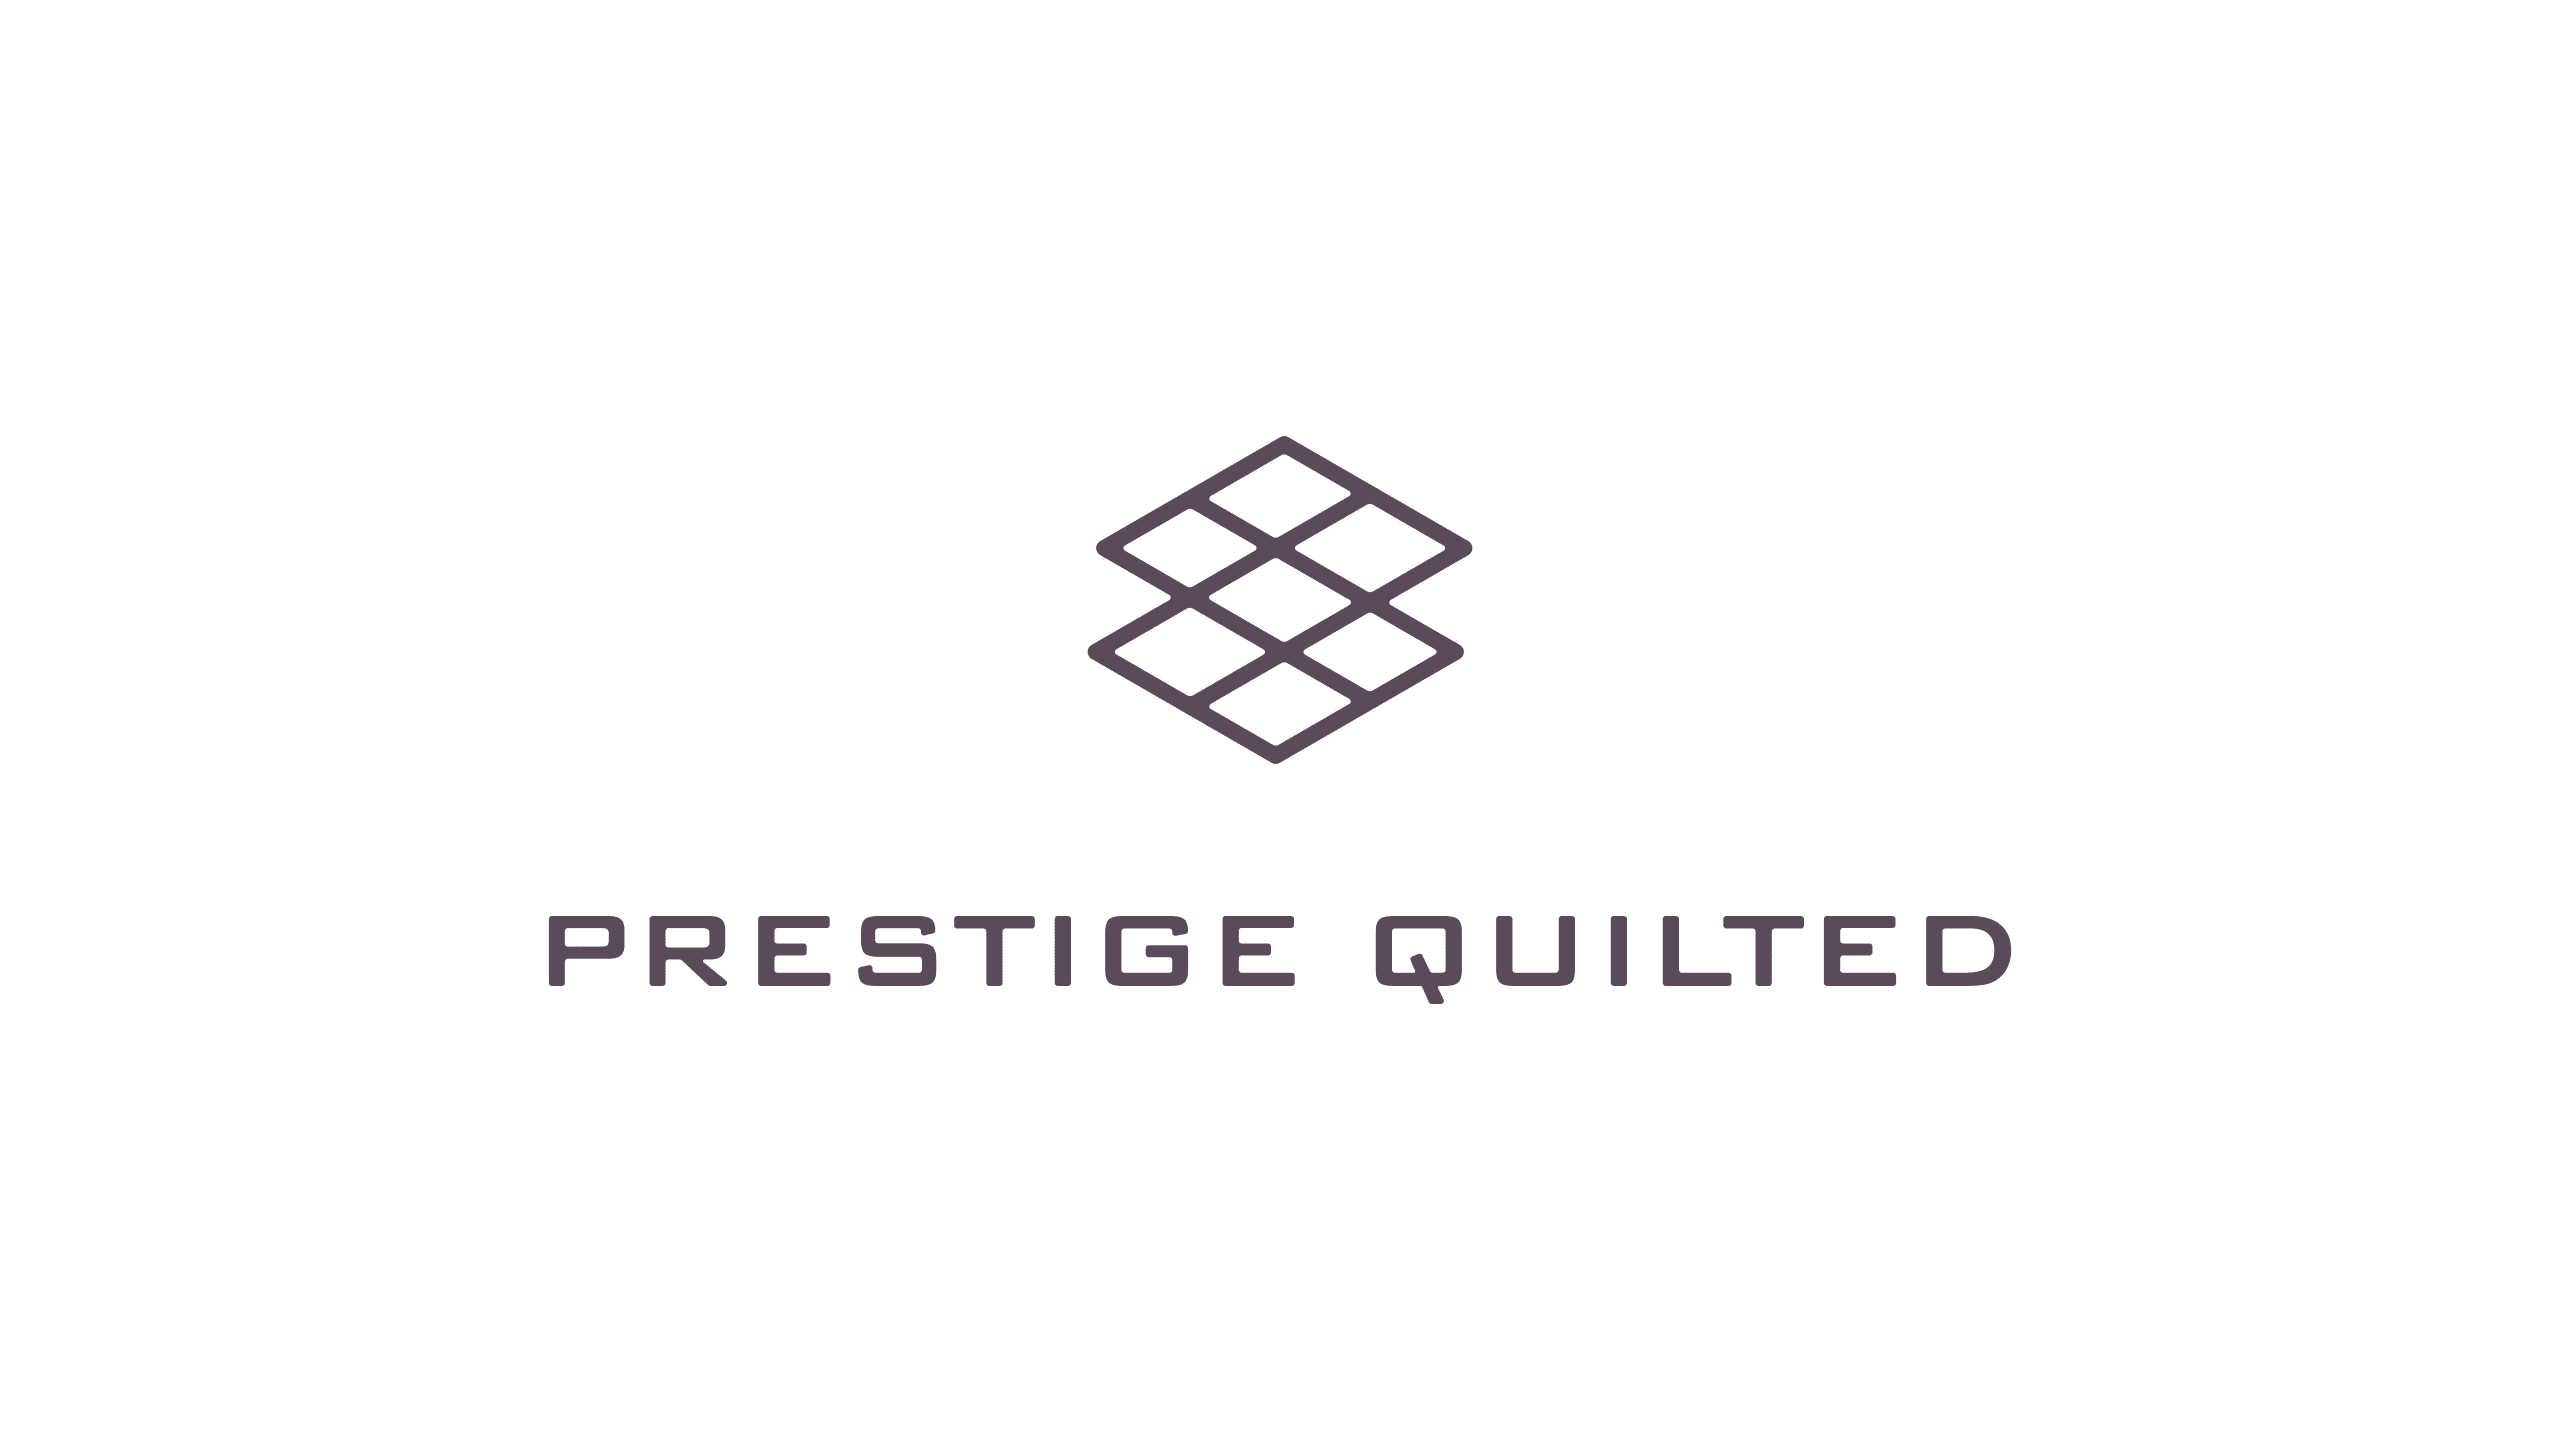 Prestige quilted